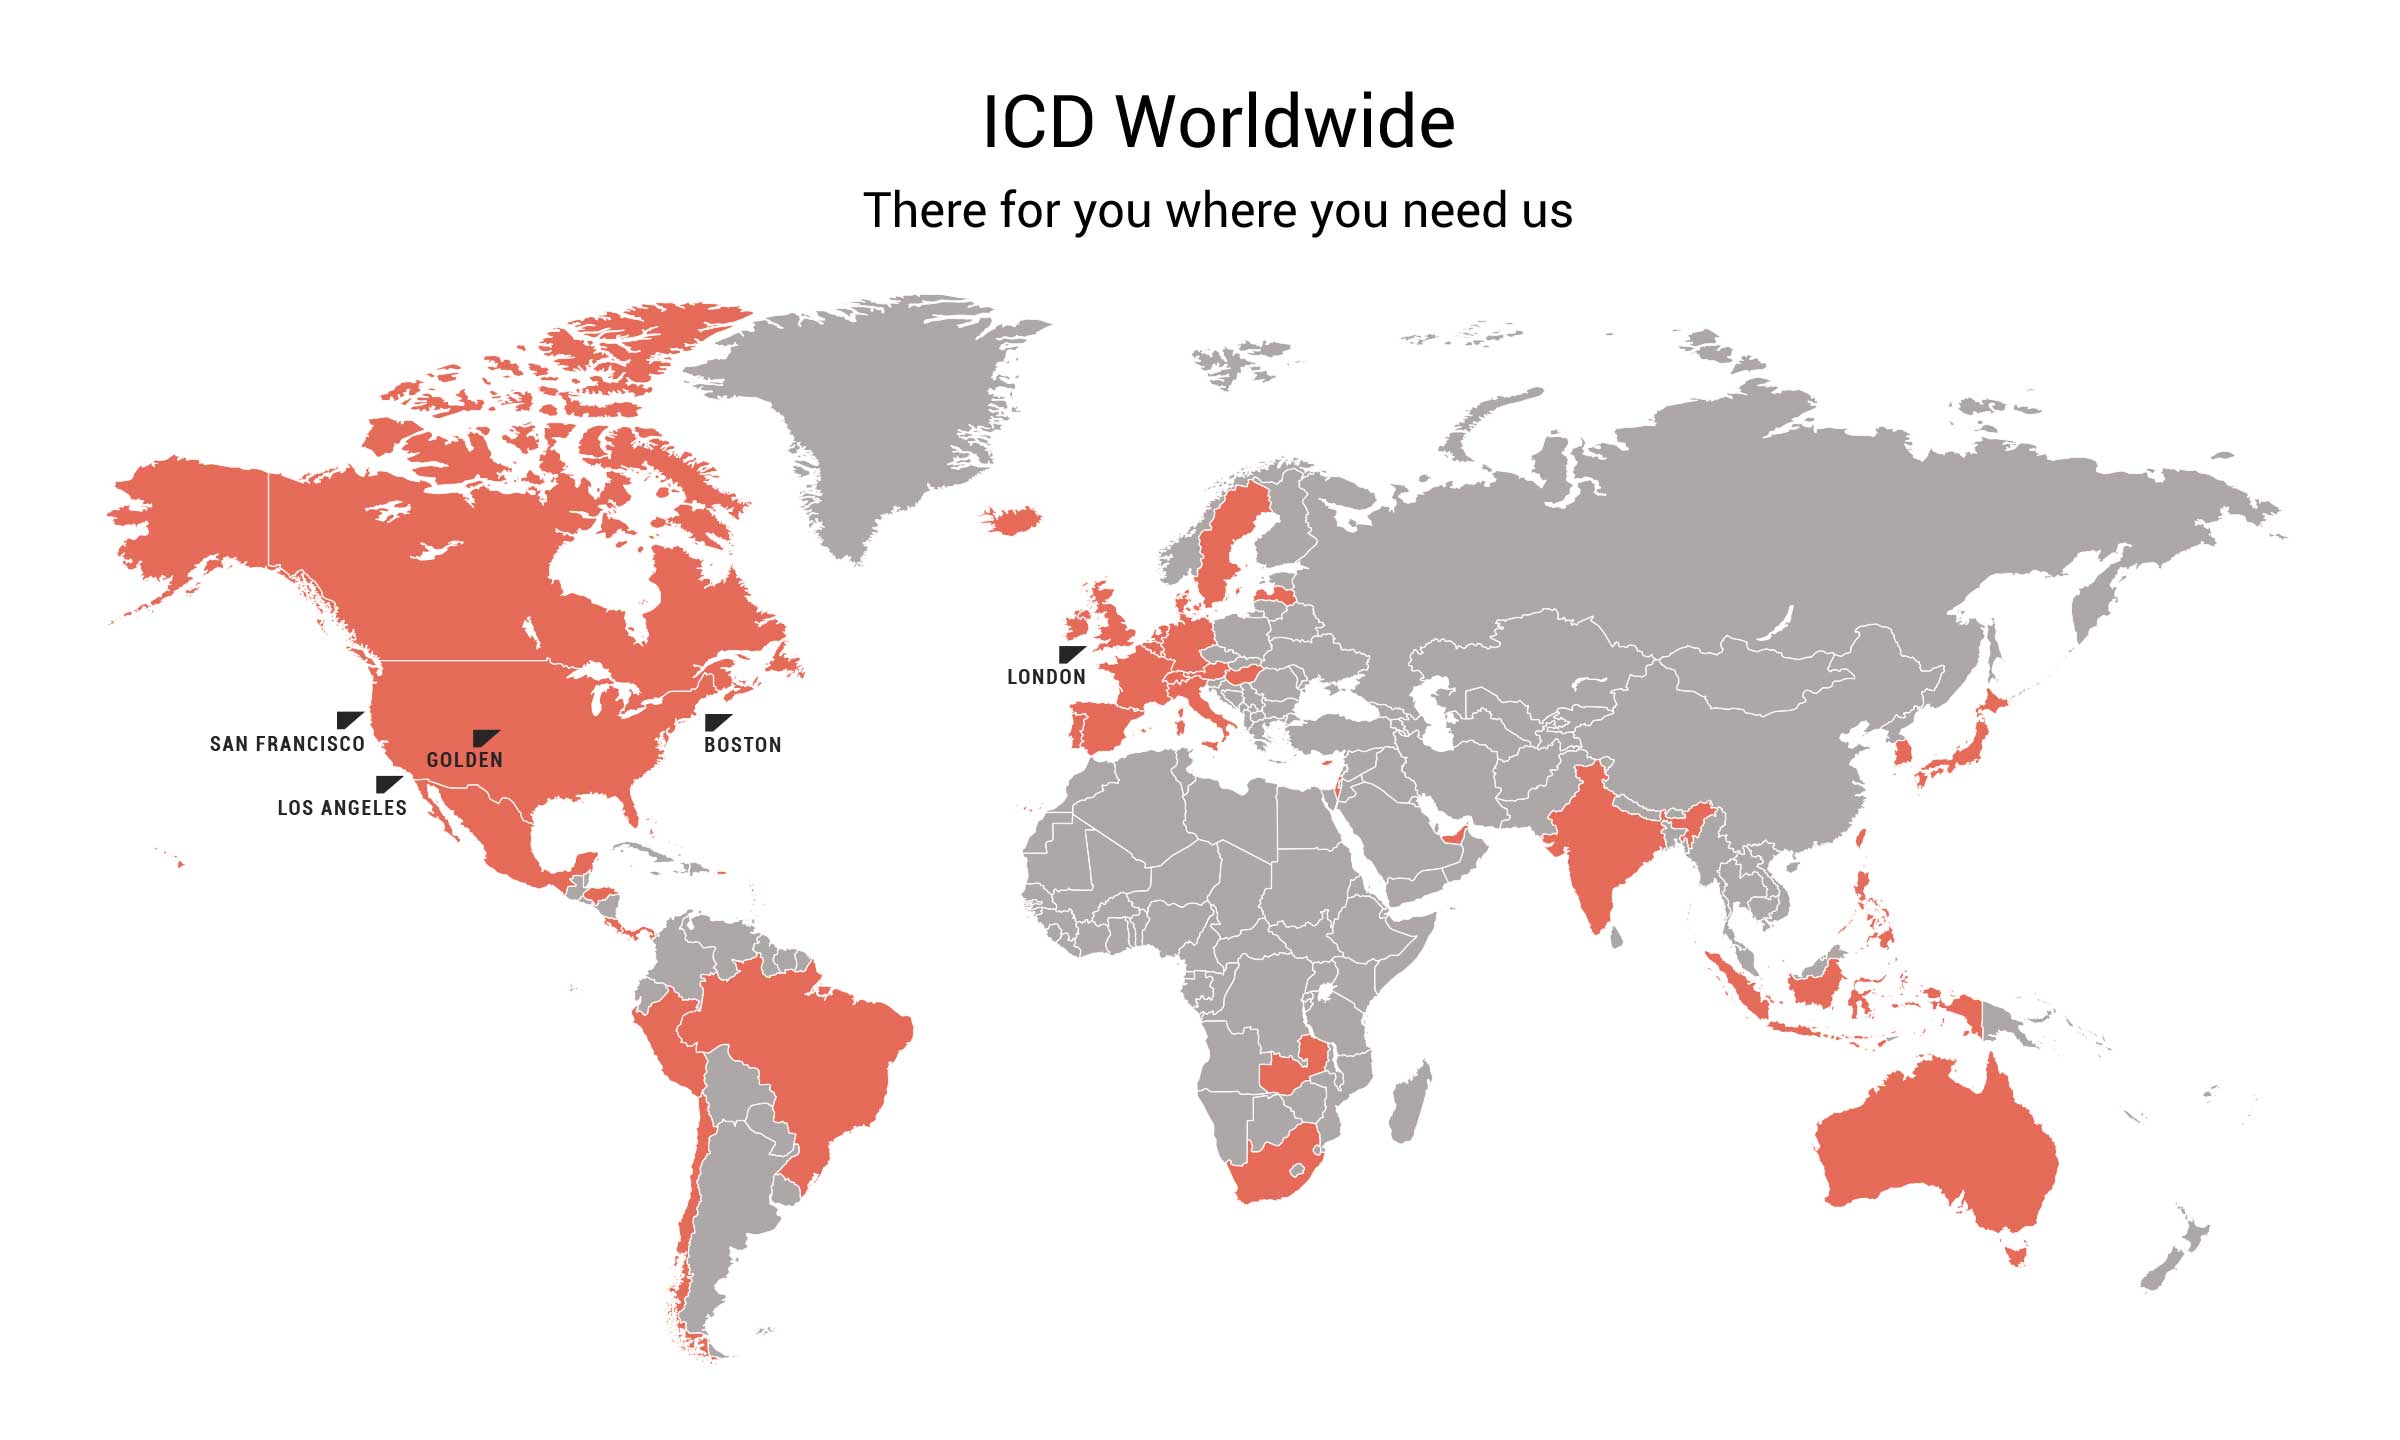 ICD Worldwide - There for you where you need us.